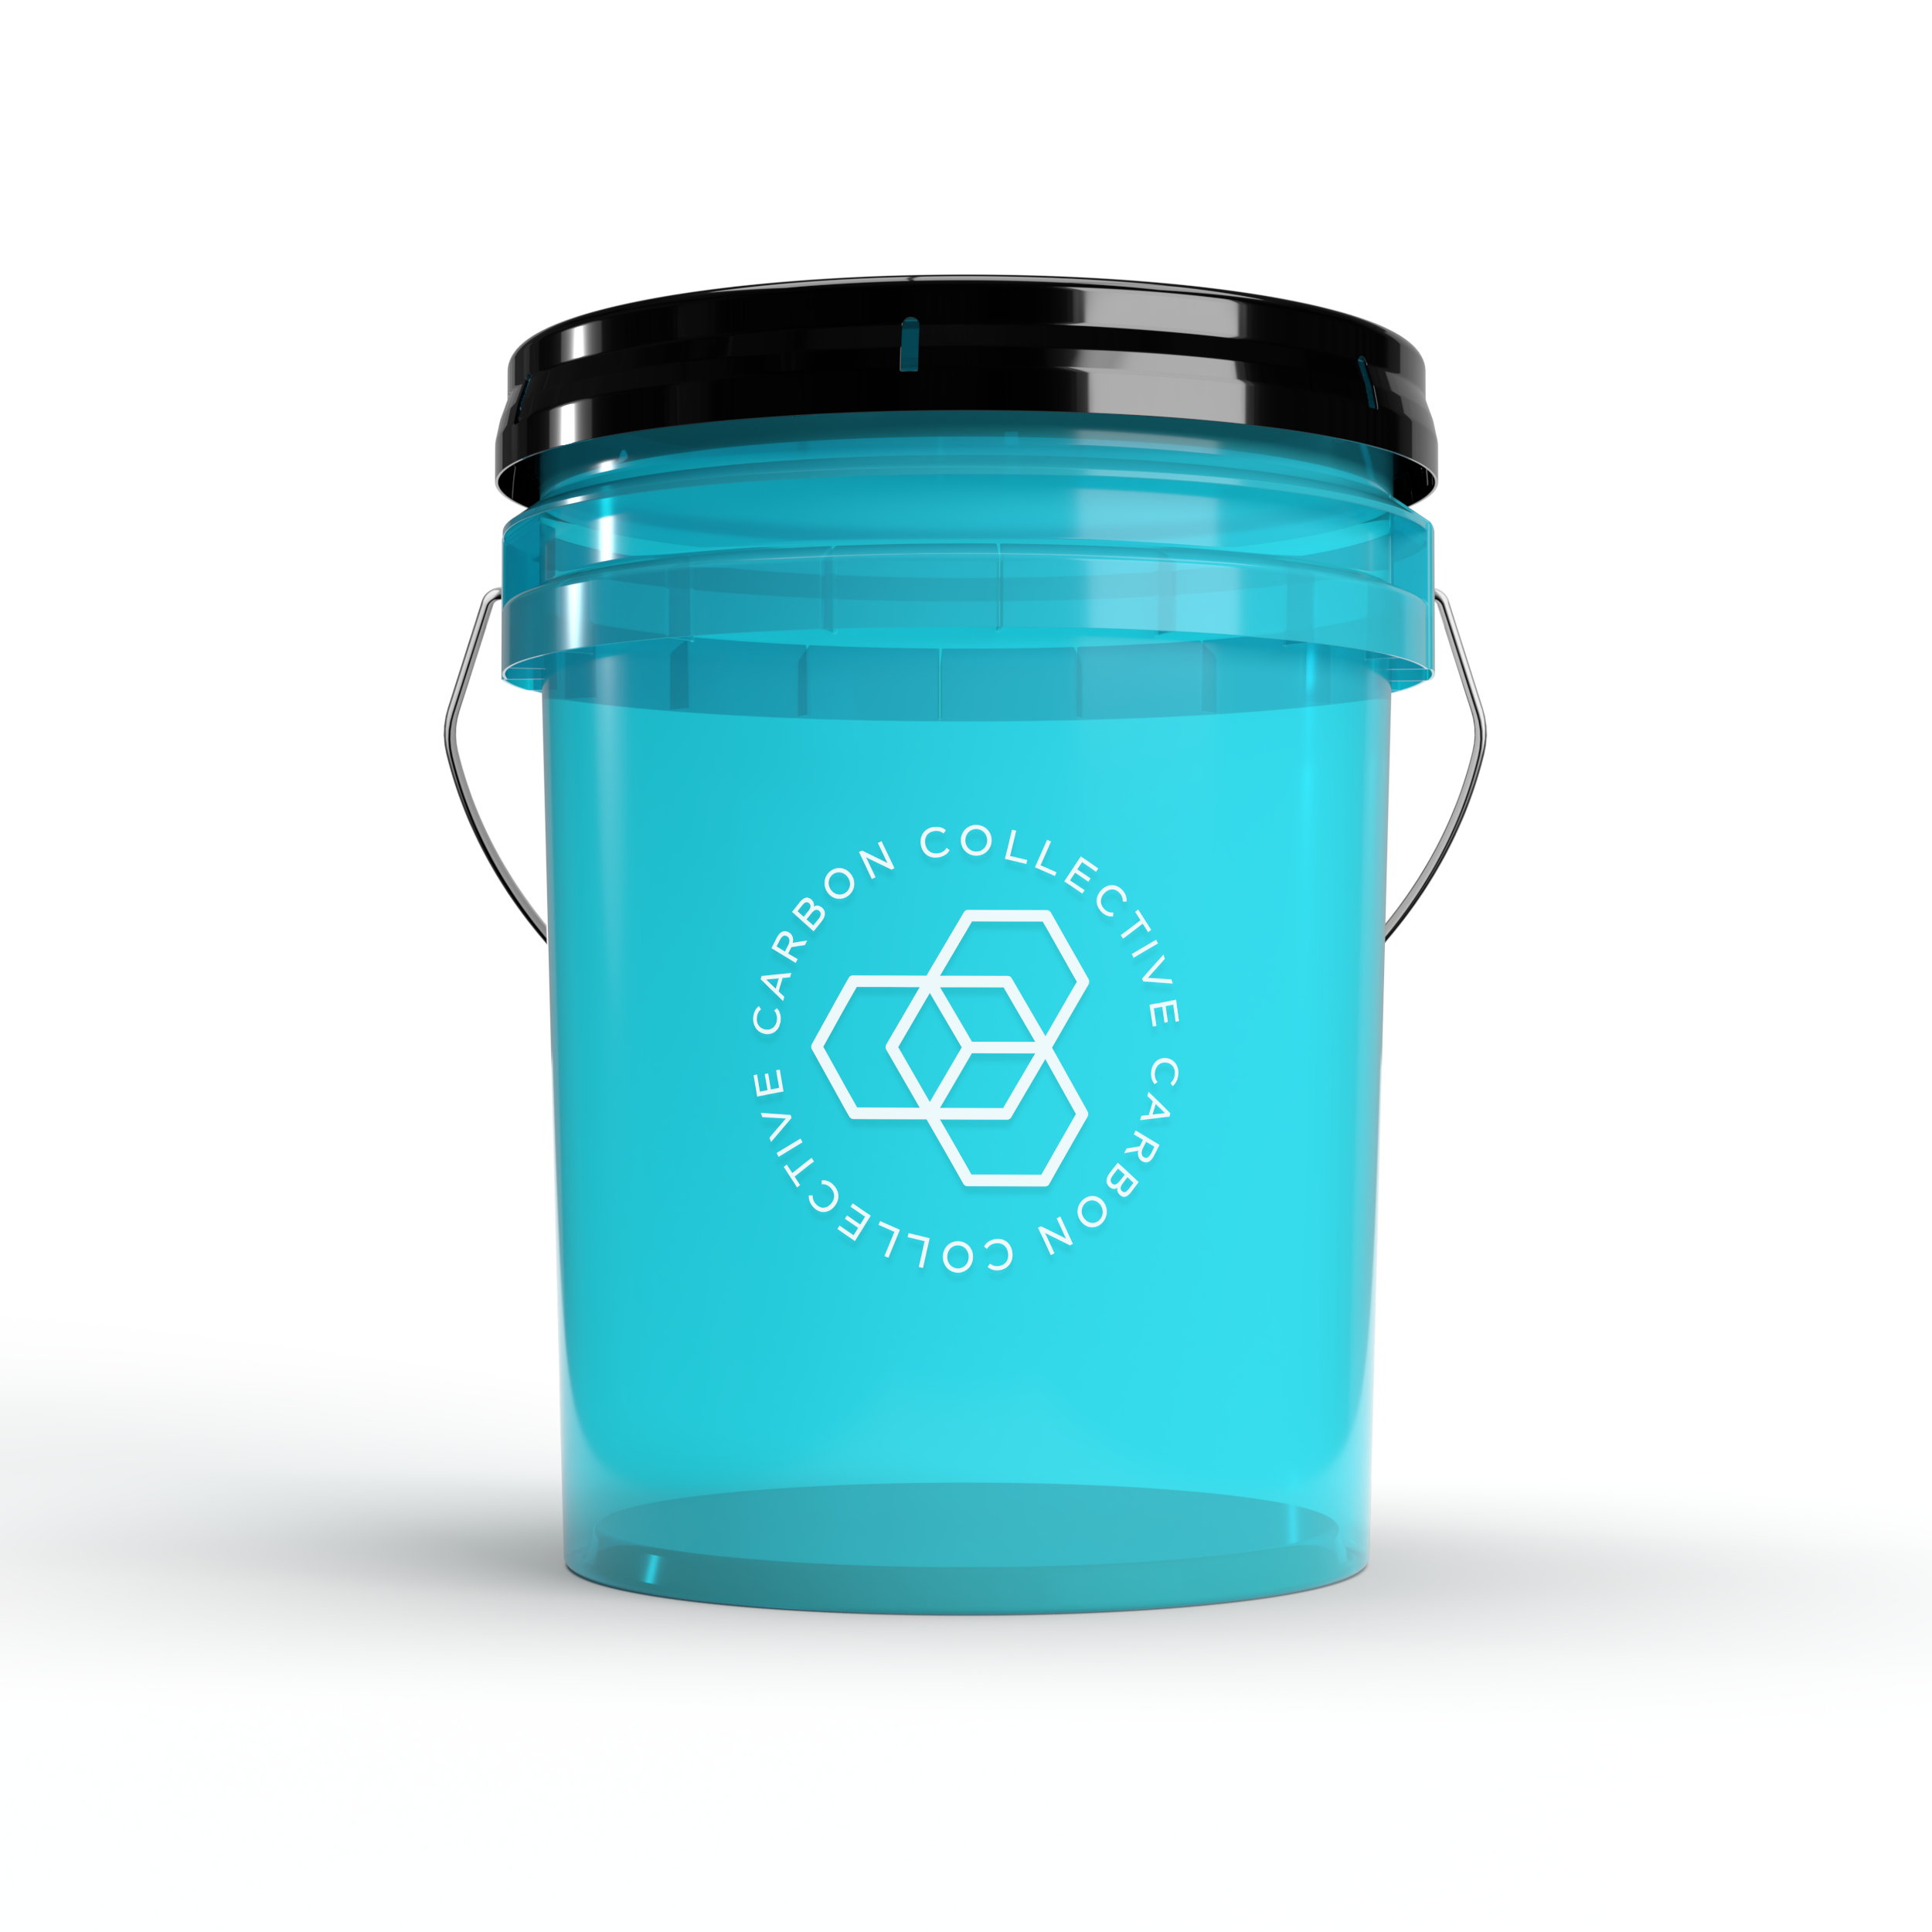 Carbon Collective Detailing Bucket - Clear Teal (20L)